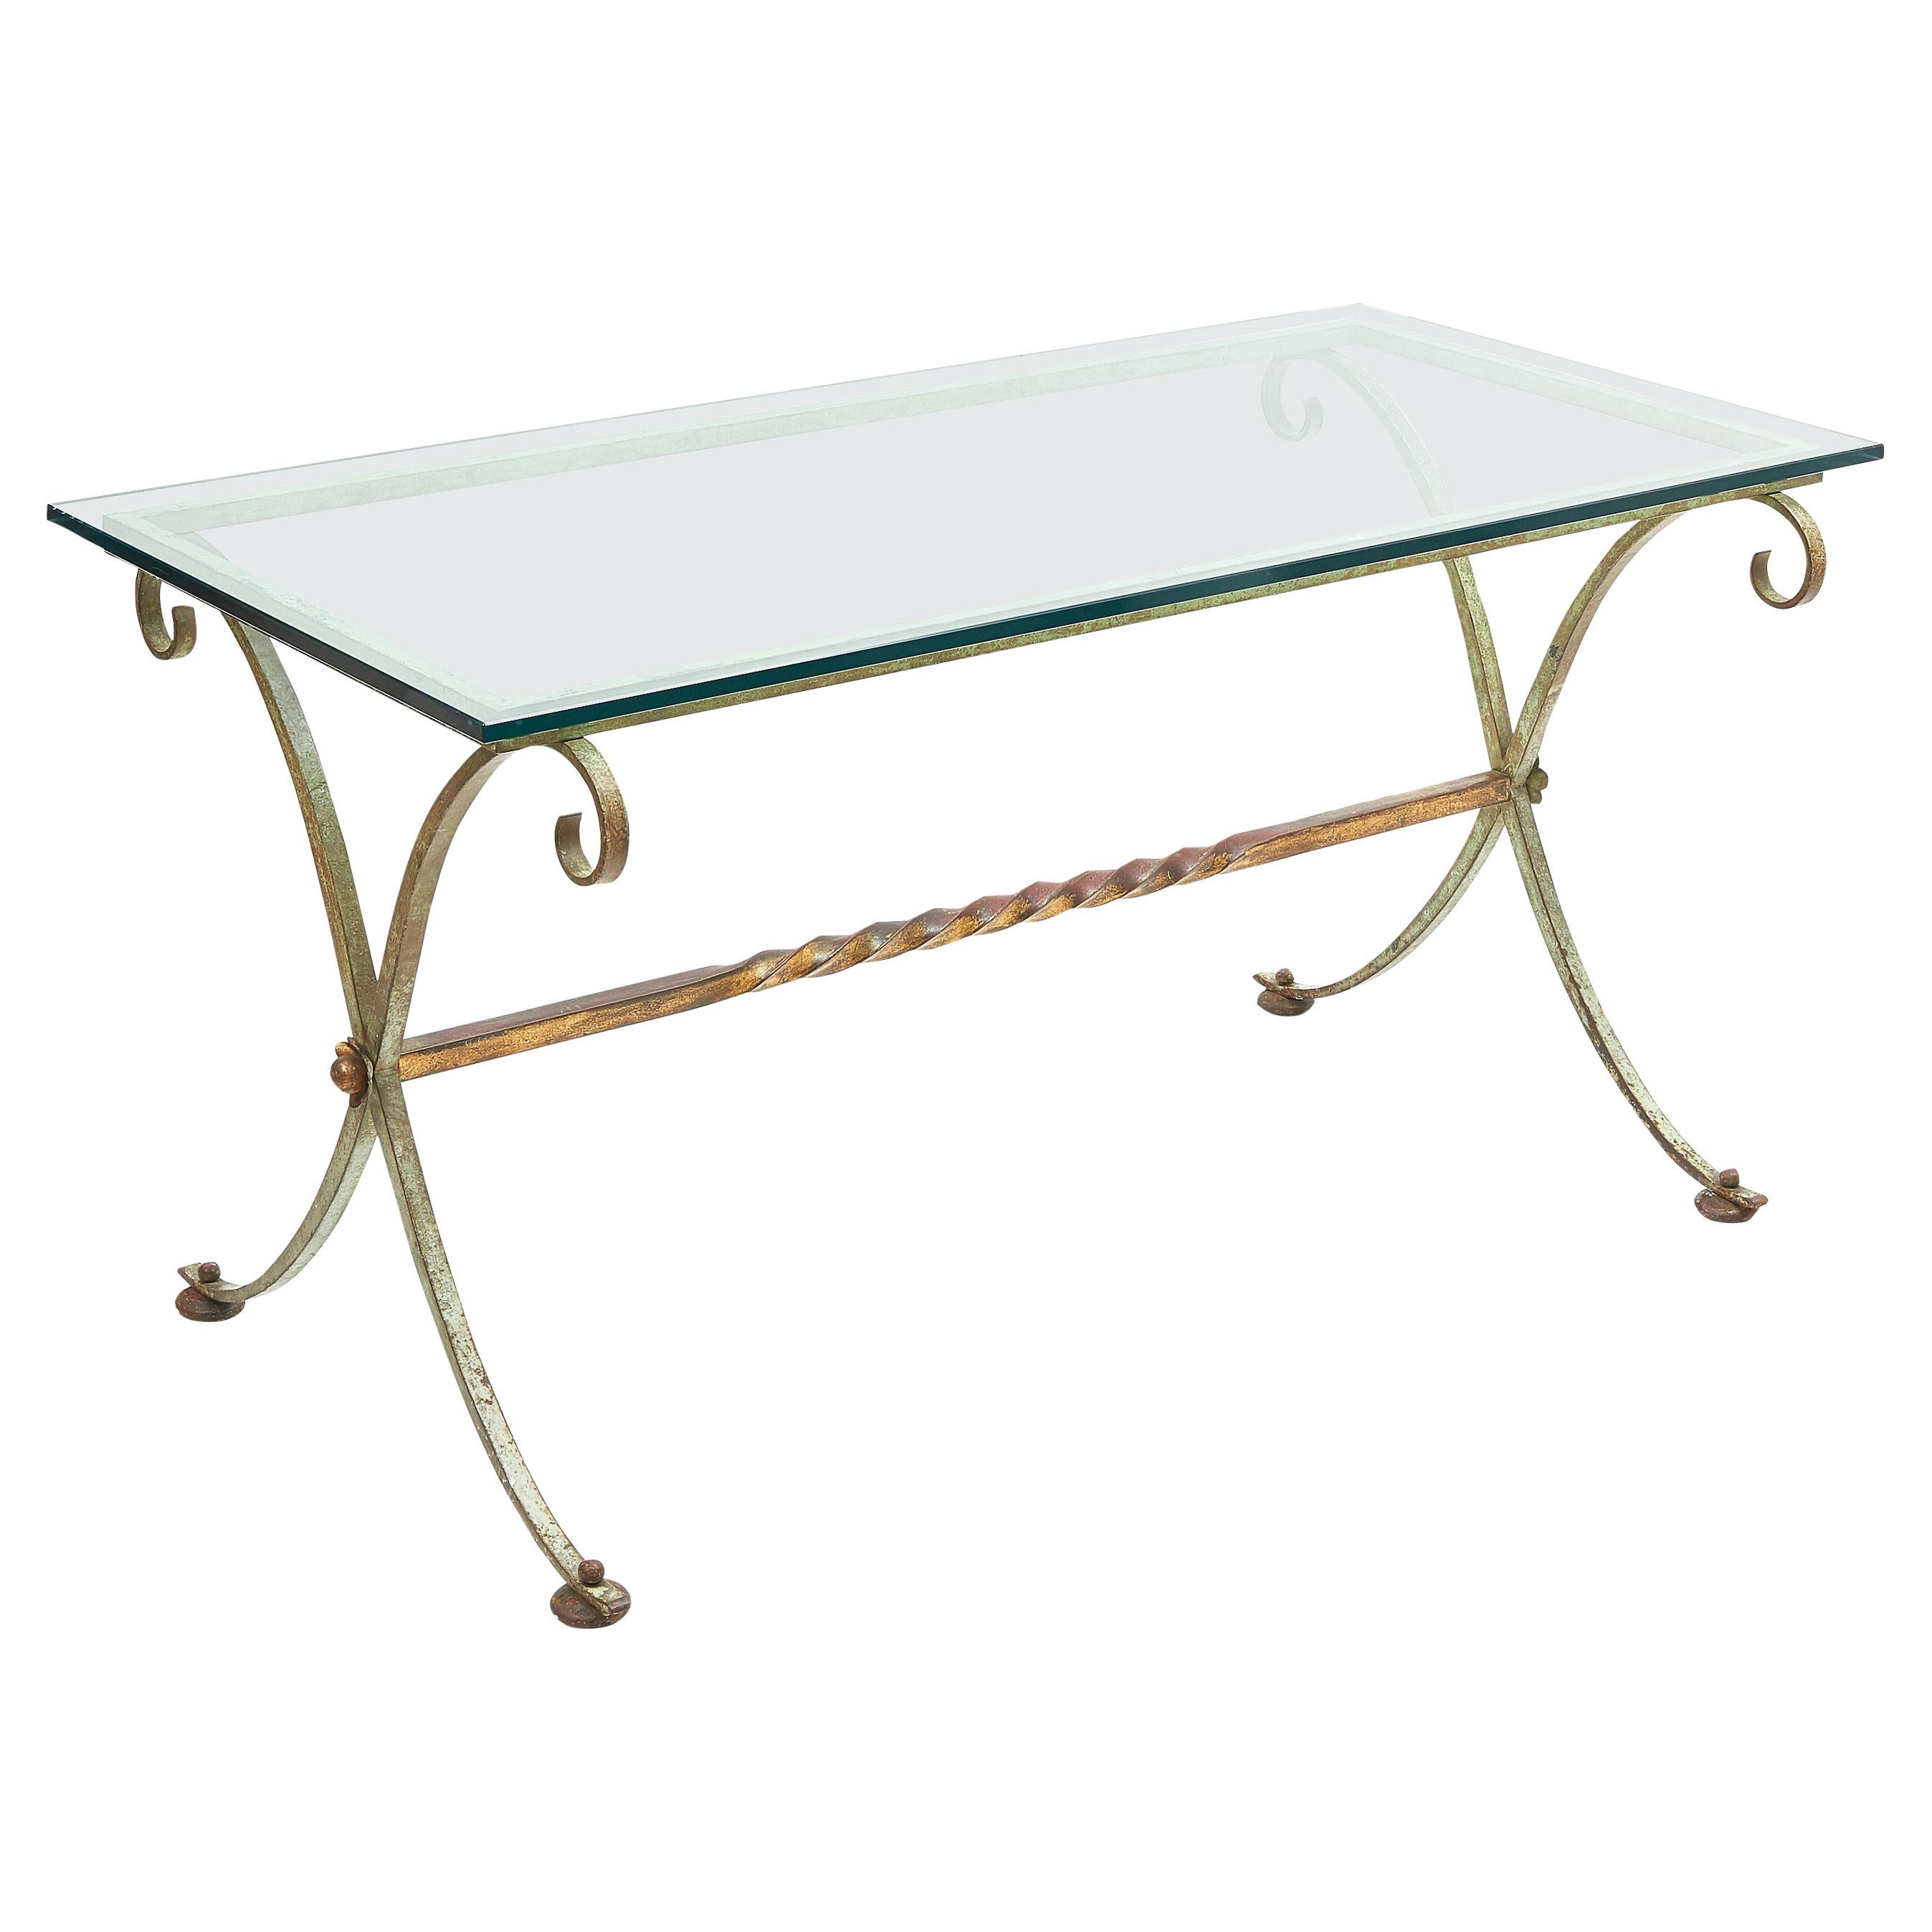 French Painted and Gilt Wrought Iron Base Table with Glass Top, circa 1940 For Sale